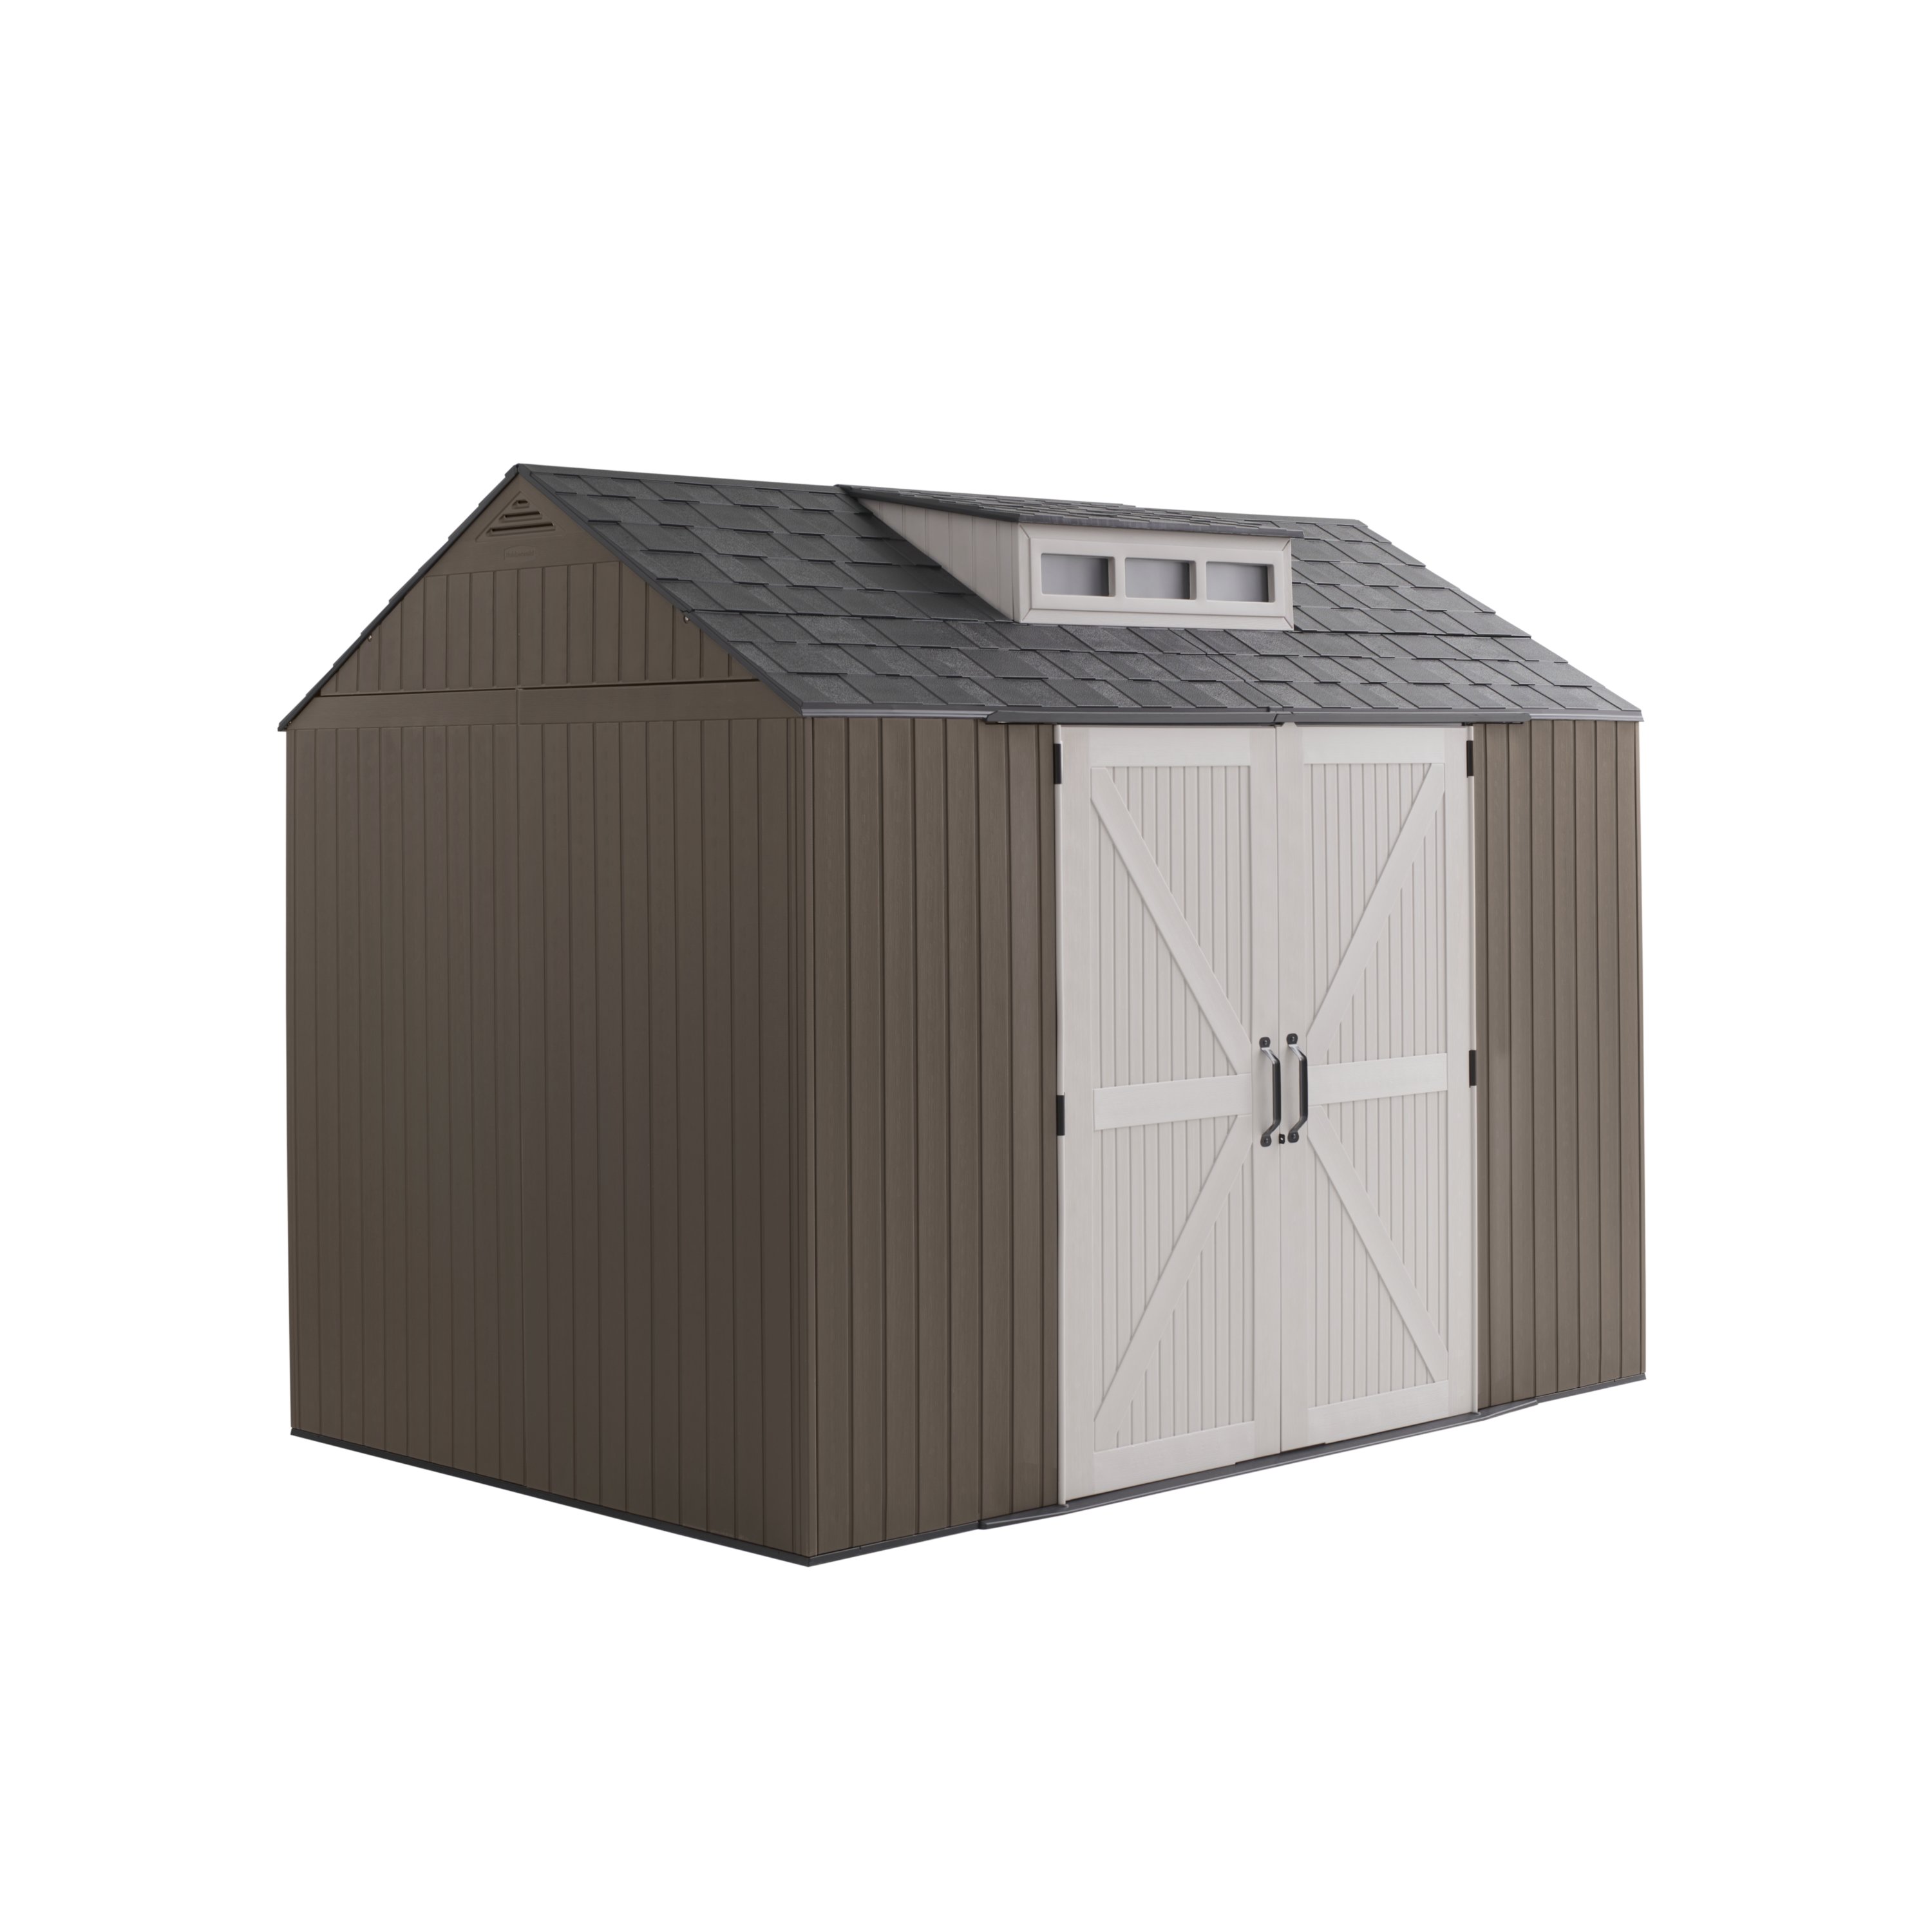 https://s7d9.scene7.com/is/image/NewellRubbermaid/2156398_RC_OS_7x10.5Shed_DoorsClosed_Product-Shot_Angle